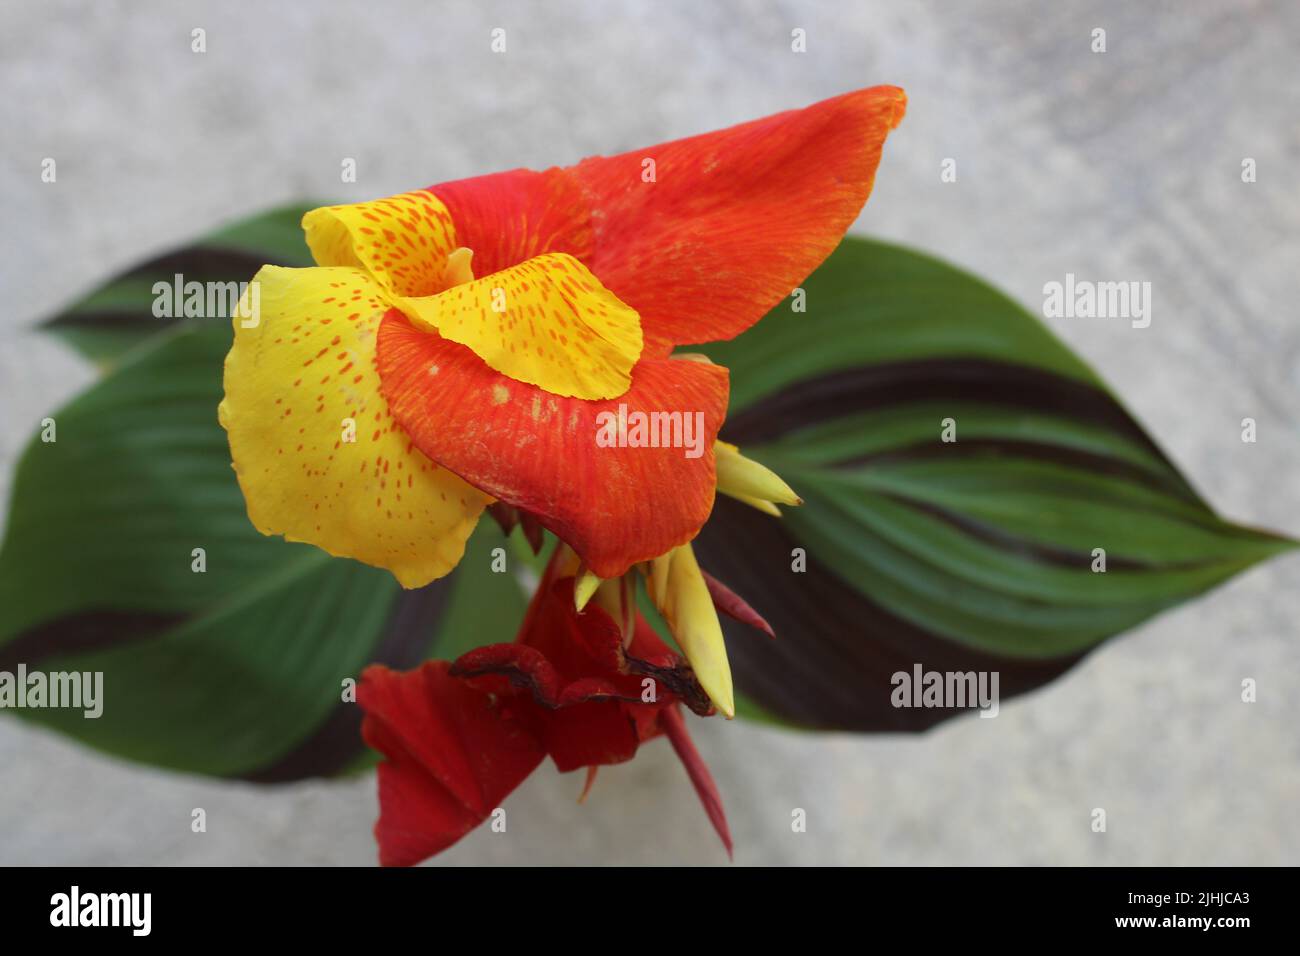 Red and yellow canna (maraca roja) flower with green and purple leaves in balcony. Stock Photo